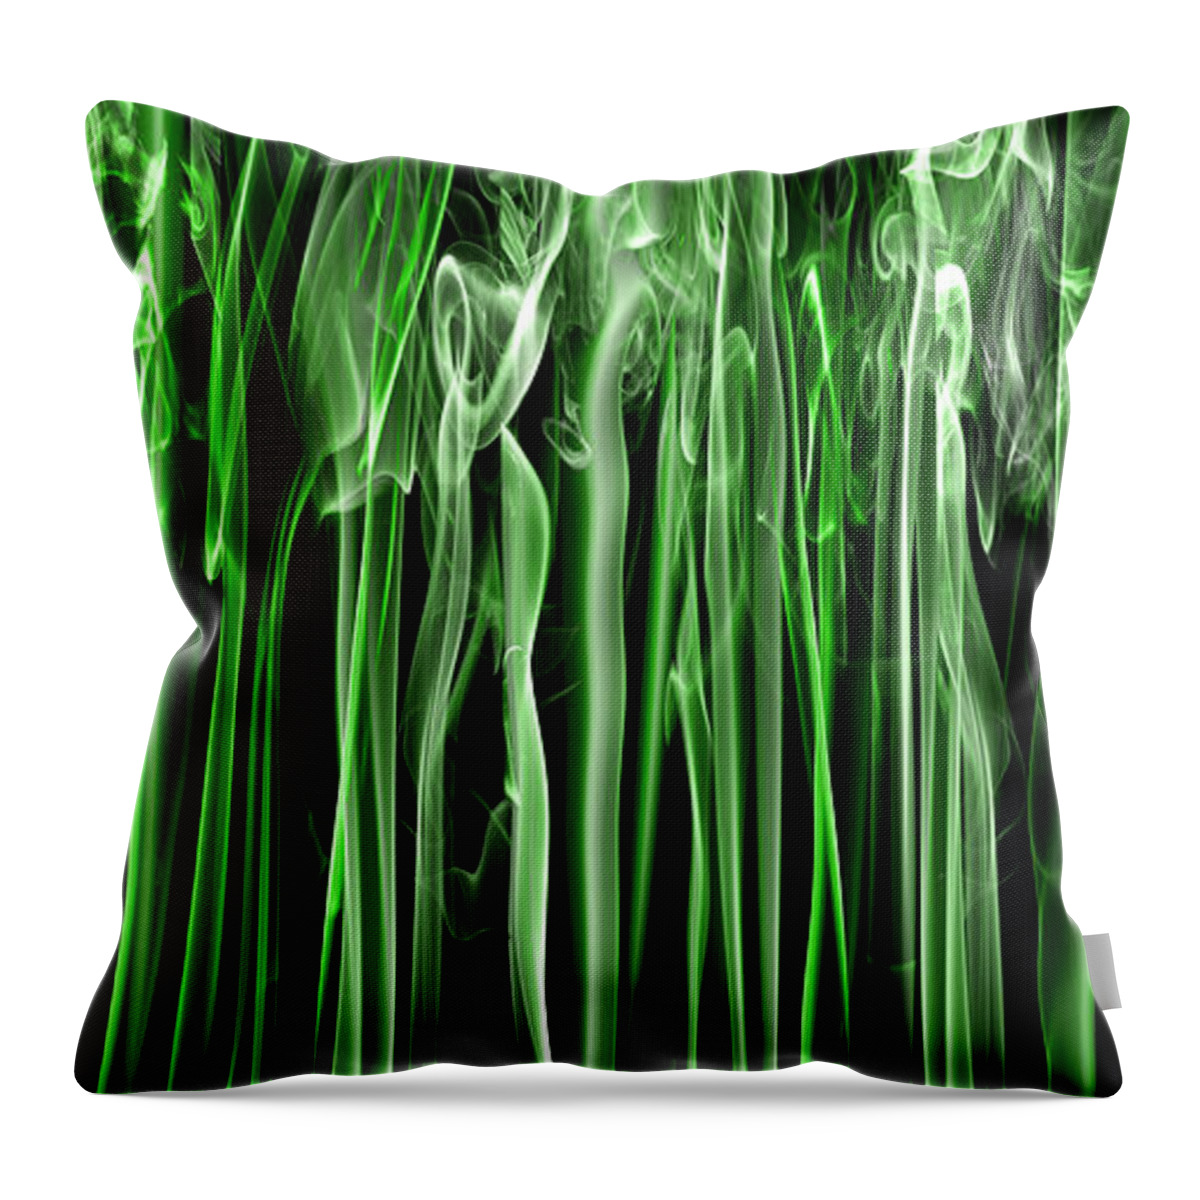 Smoke Throw Pillow featuring the photograph Green Grass Smoke Photography by Sabine Jacobs